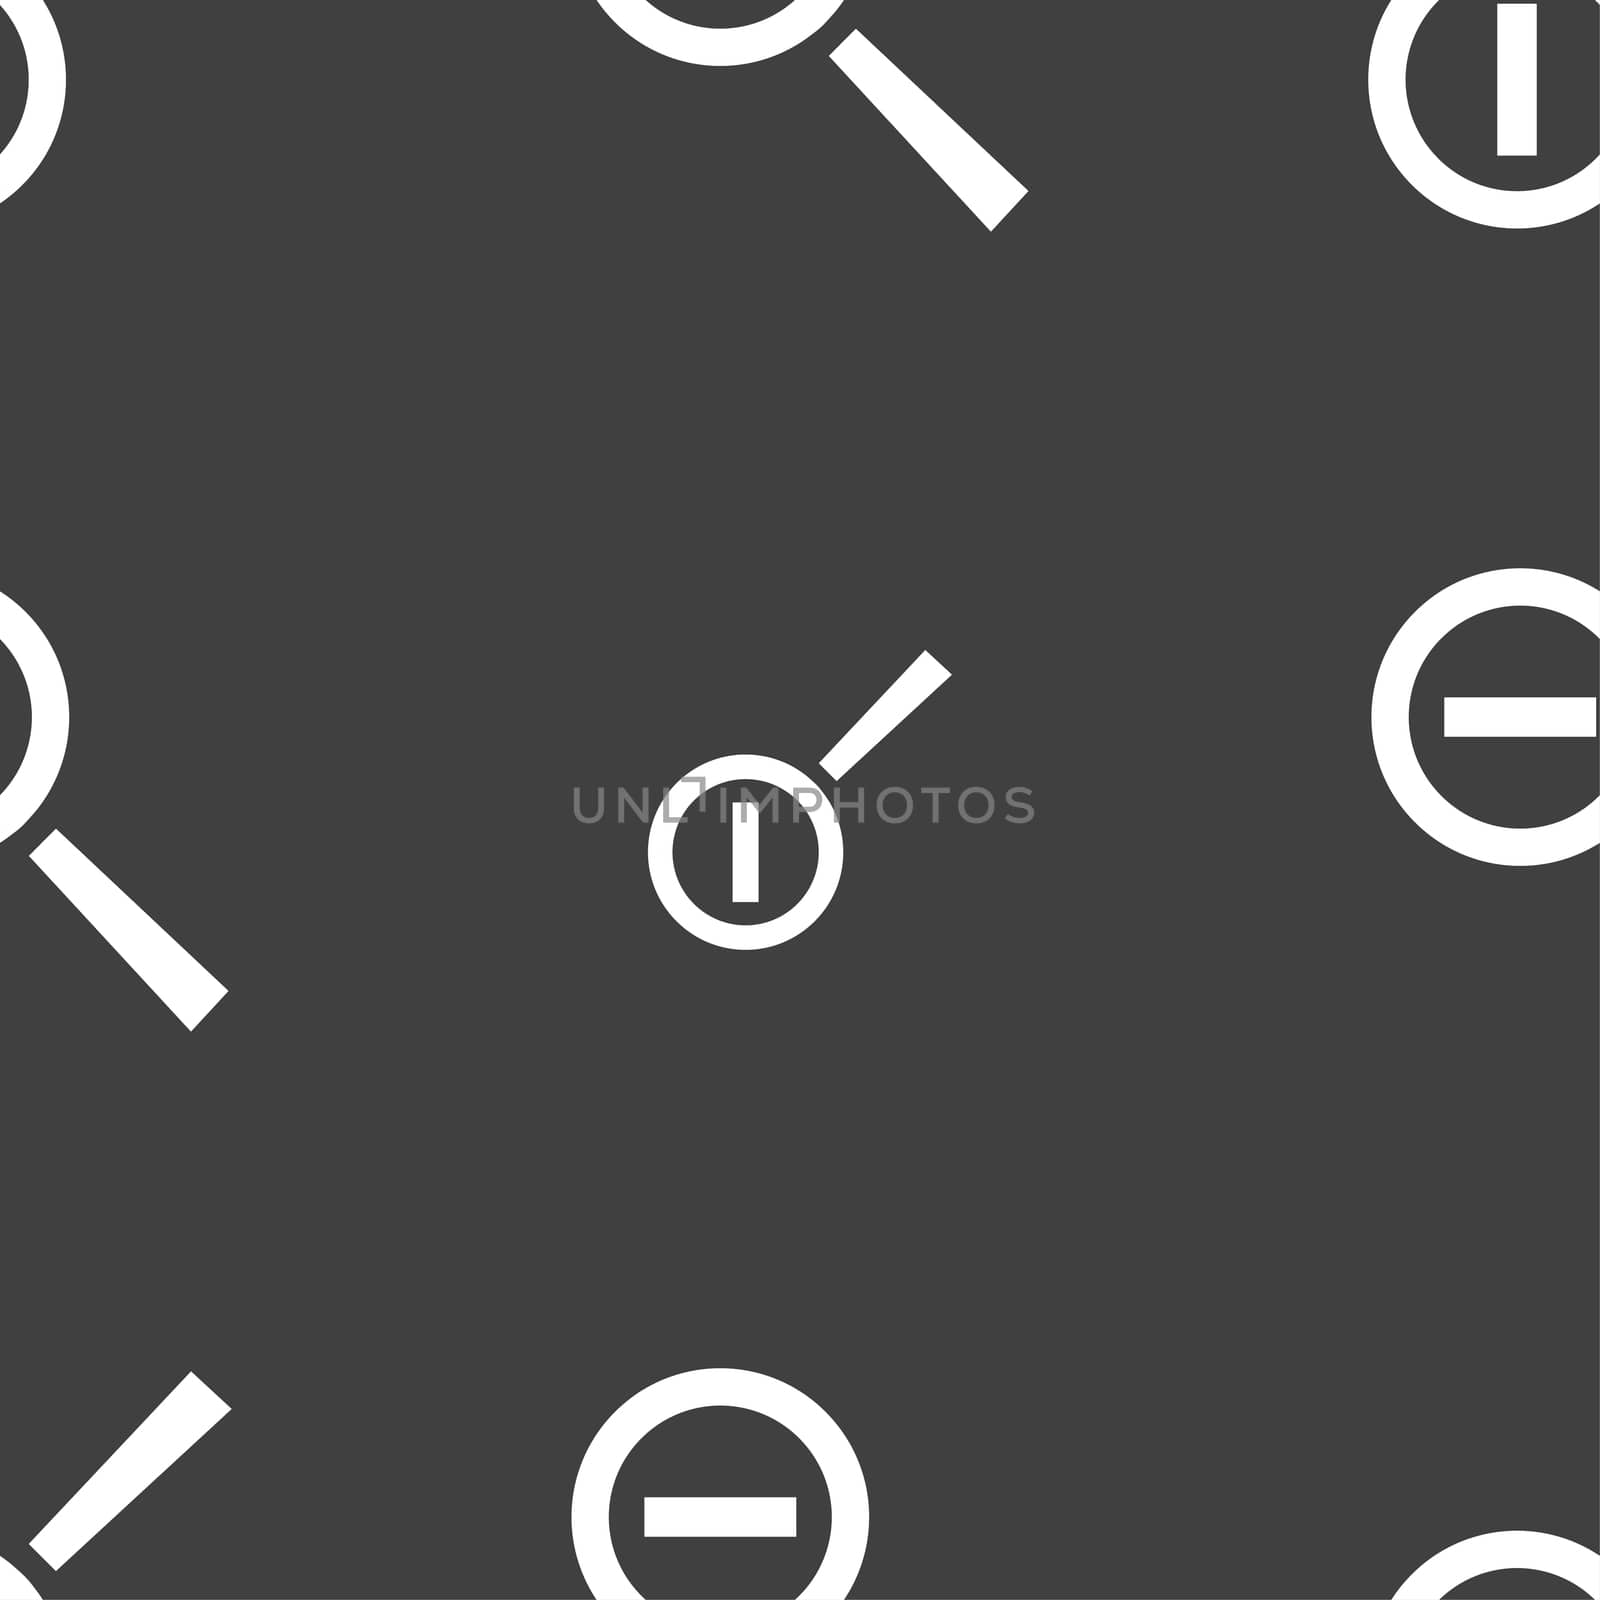 Magnifier glass, Zoom tool icon sign. Seamless pattern on a gray background. illustration